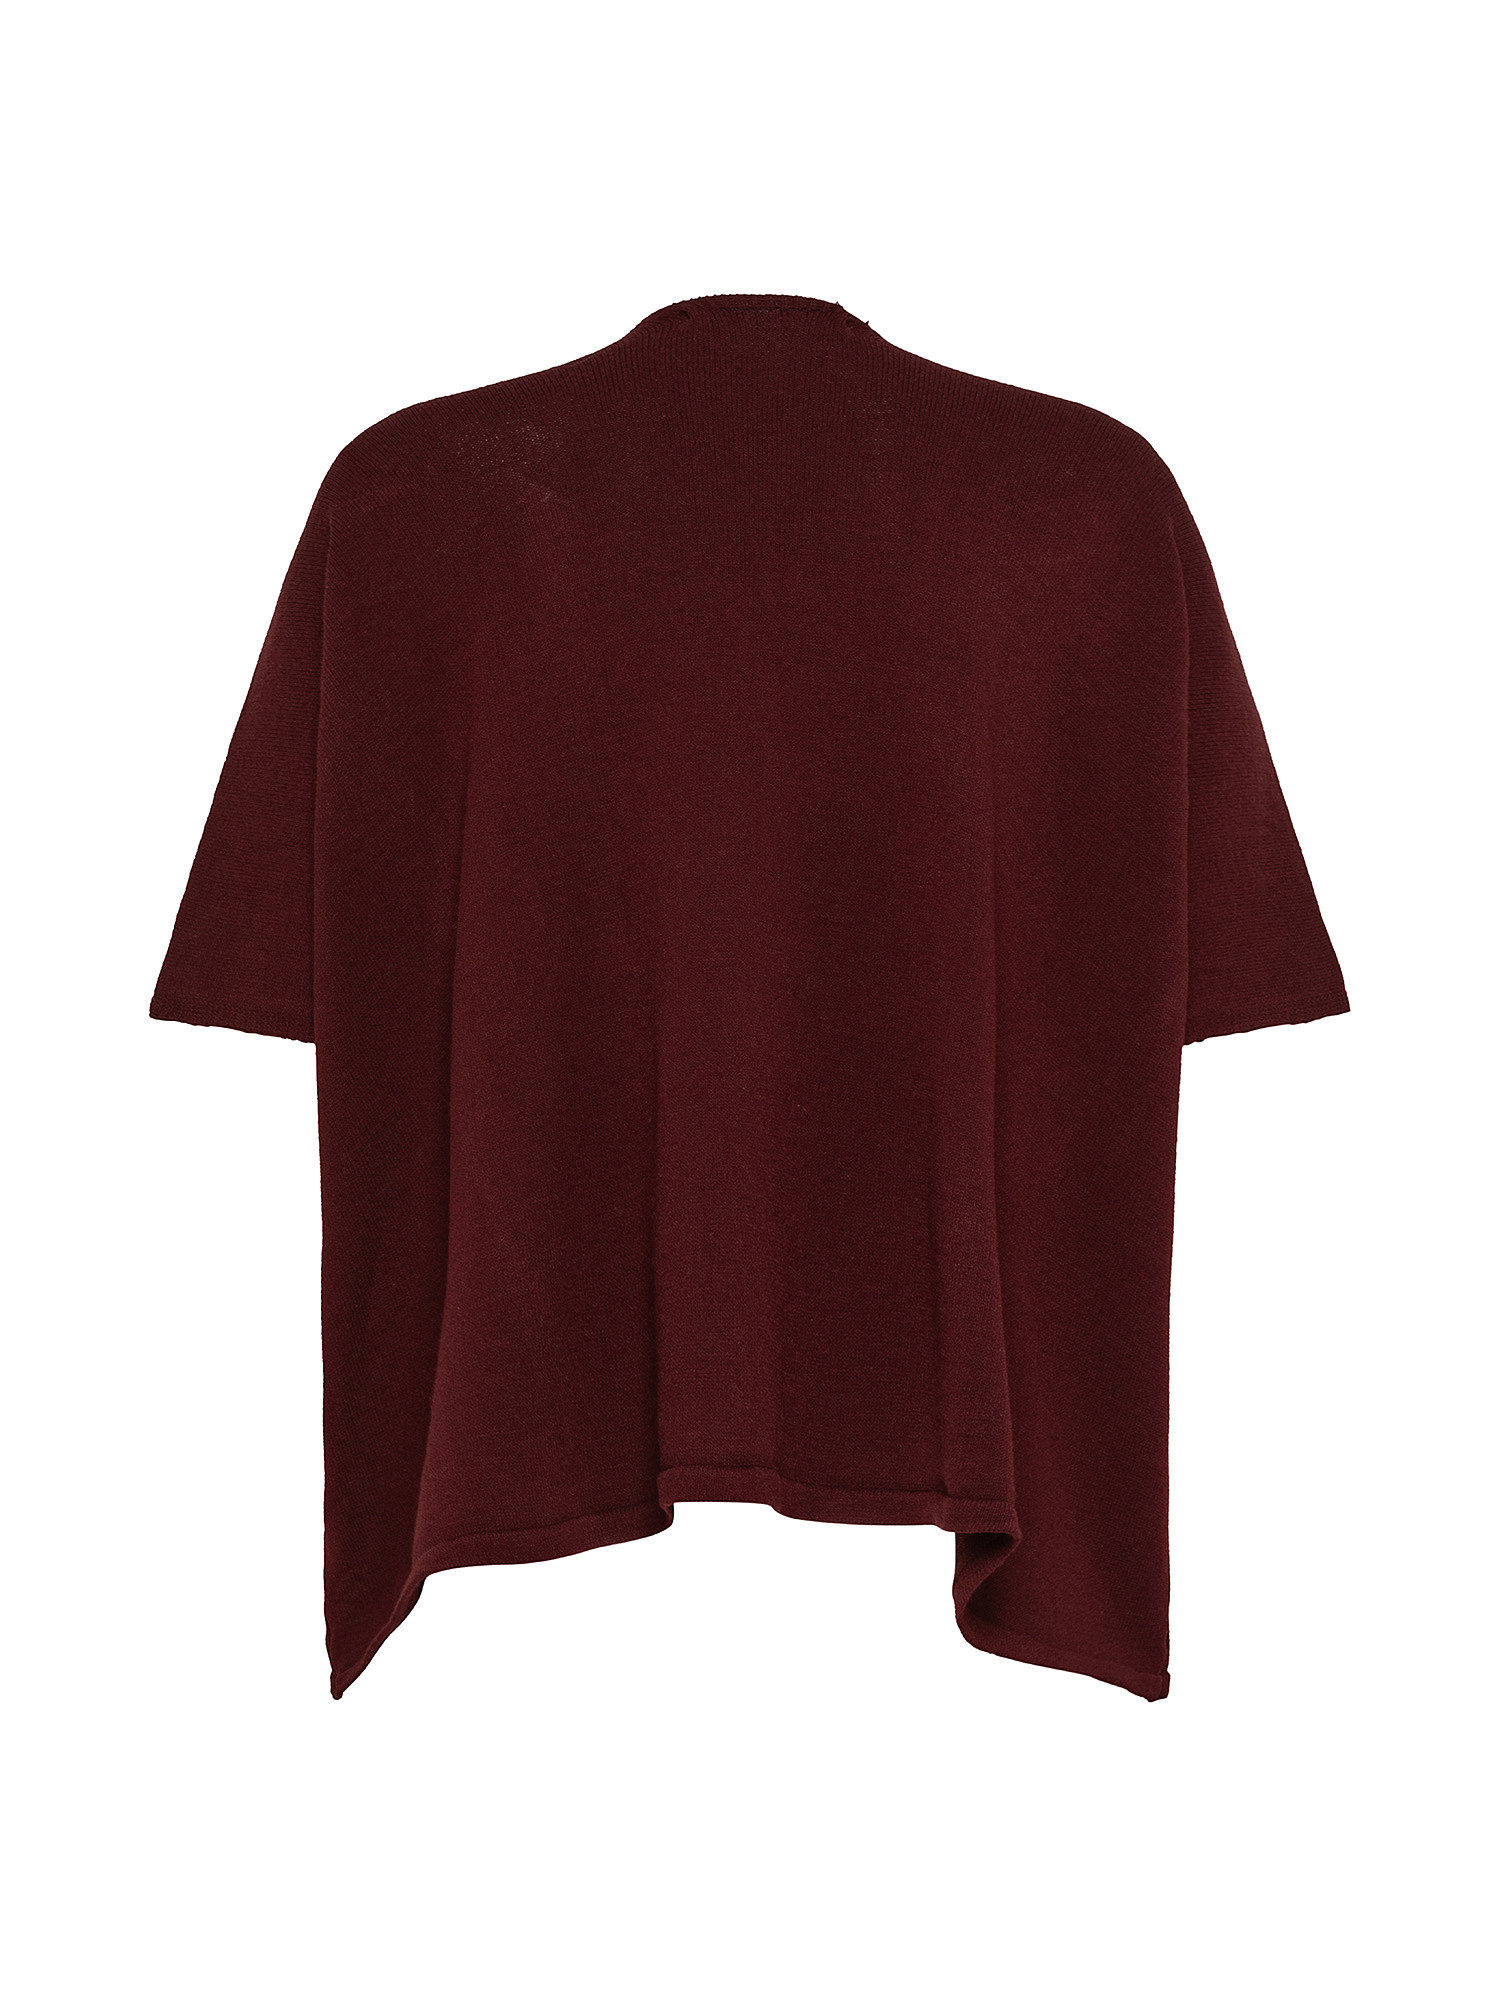 Cardigan, Red Bordeaux, large image number 1